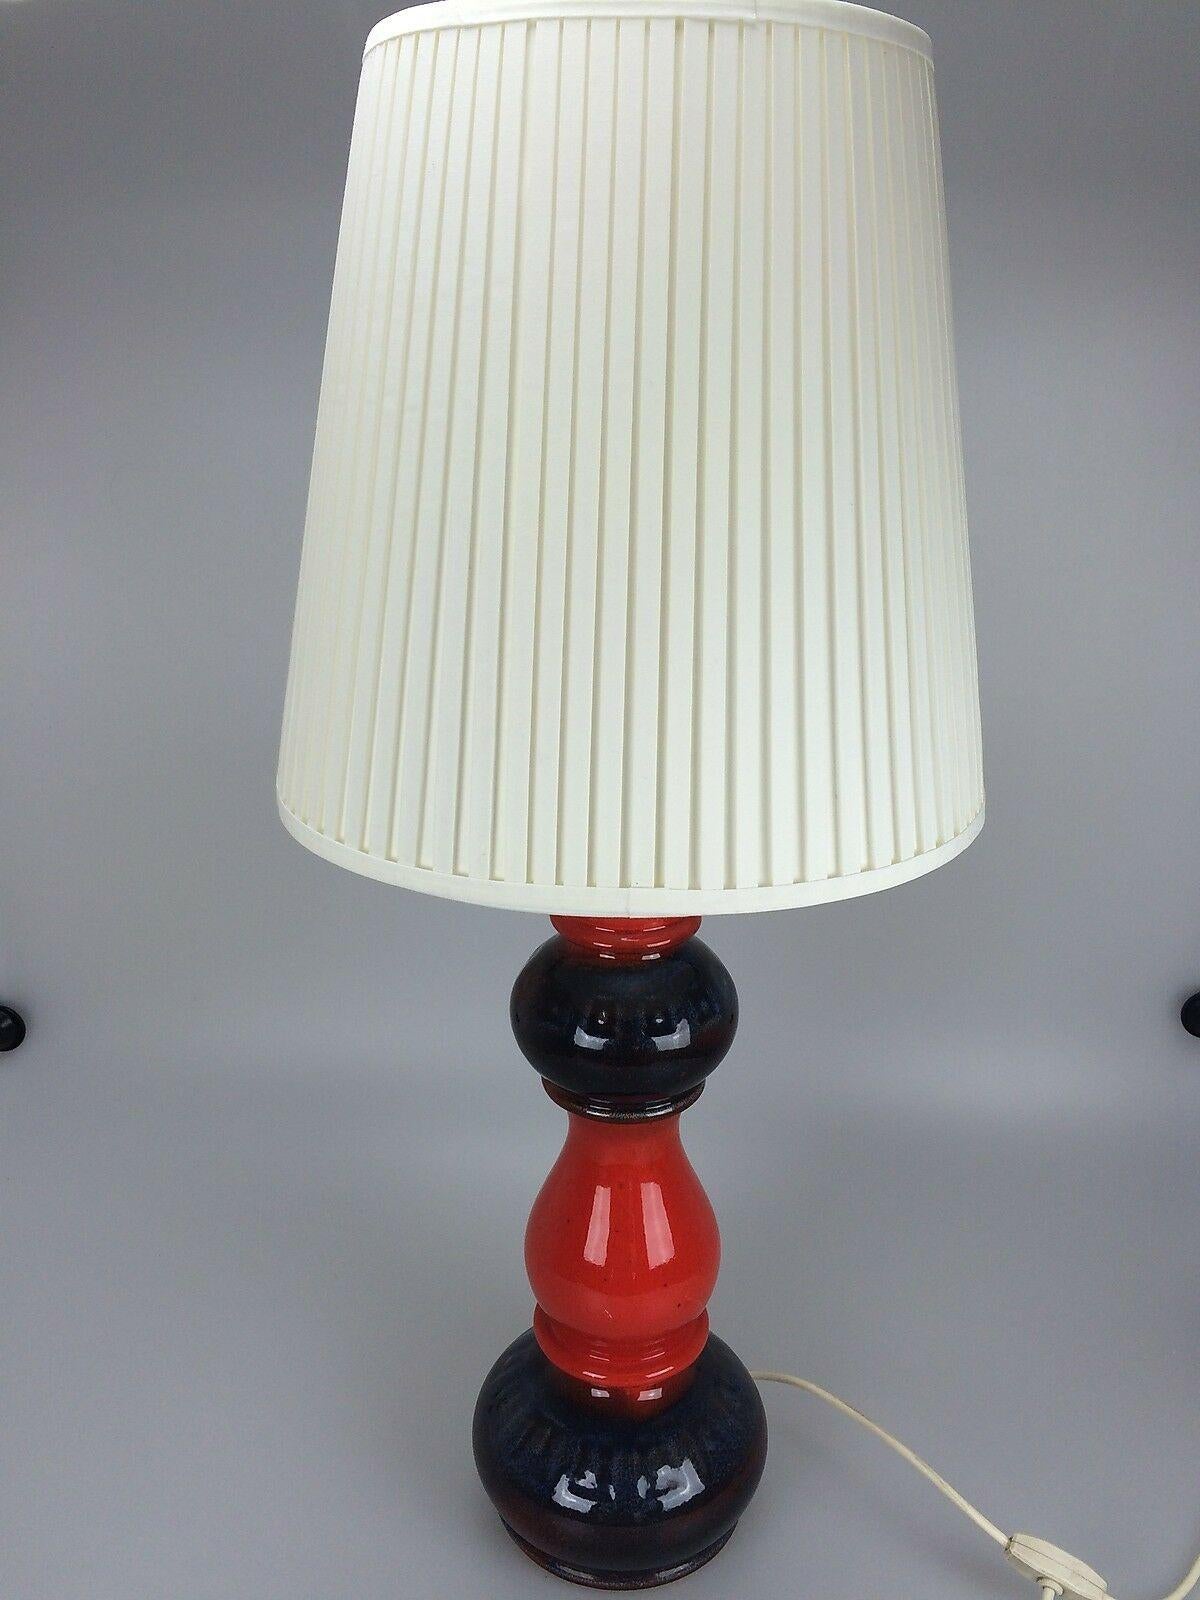 70s Lamp light table lamp table lamp ceramic space age design red.

Object: table lamp

Manufacturer:

Condition: good

Age: around 1960-1970

Dimensions:

Diameter = 34.5cm
Height = 78cm

Other notes:

The pictures serve as part of